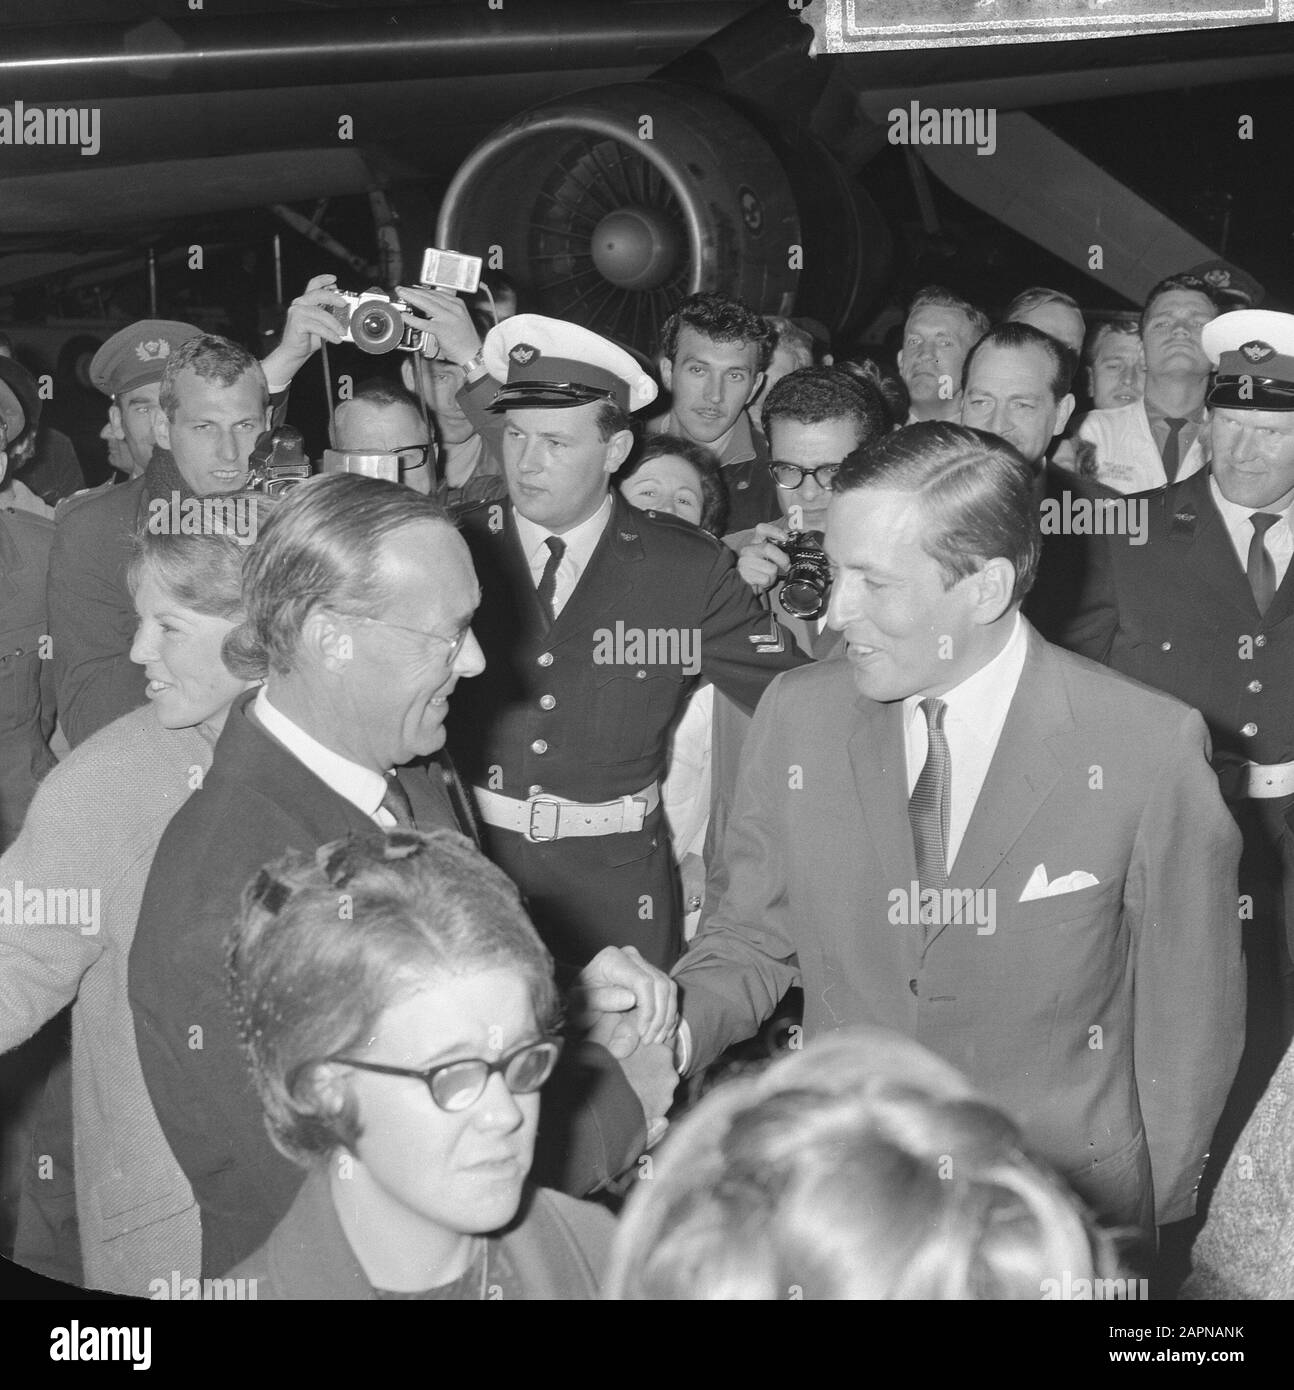 Queen Juliana and Prince Bernhard on their arrival at Schiphol Airport after a royal visit to Suriname  Prince Bernhard while greeting his future son-in-law Claus von Amsberg Date: 16 October 1965 Location: Noord-Holland, Schiphol Keywords: arrival and departure, greetings, press photographers, princes Personal name: Bernhard, prince, Claus, prince Stock Photo